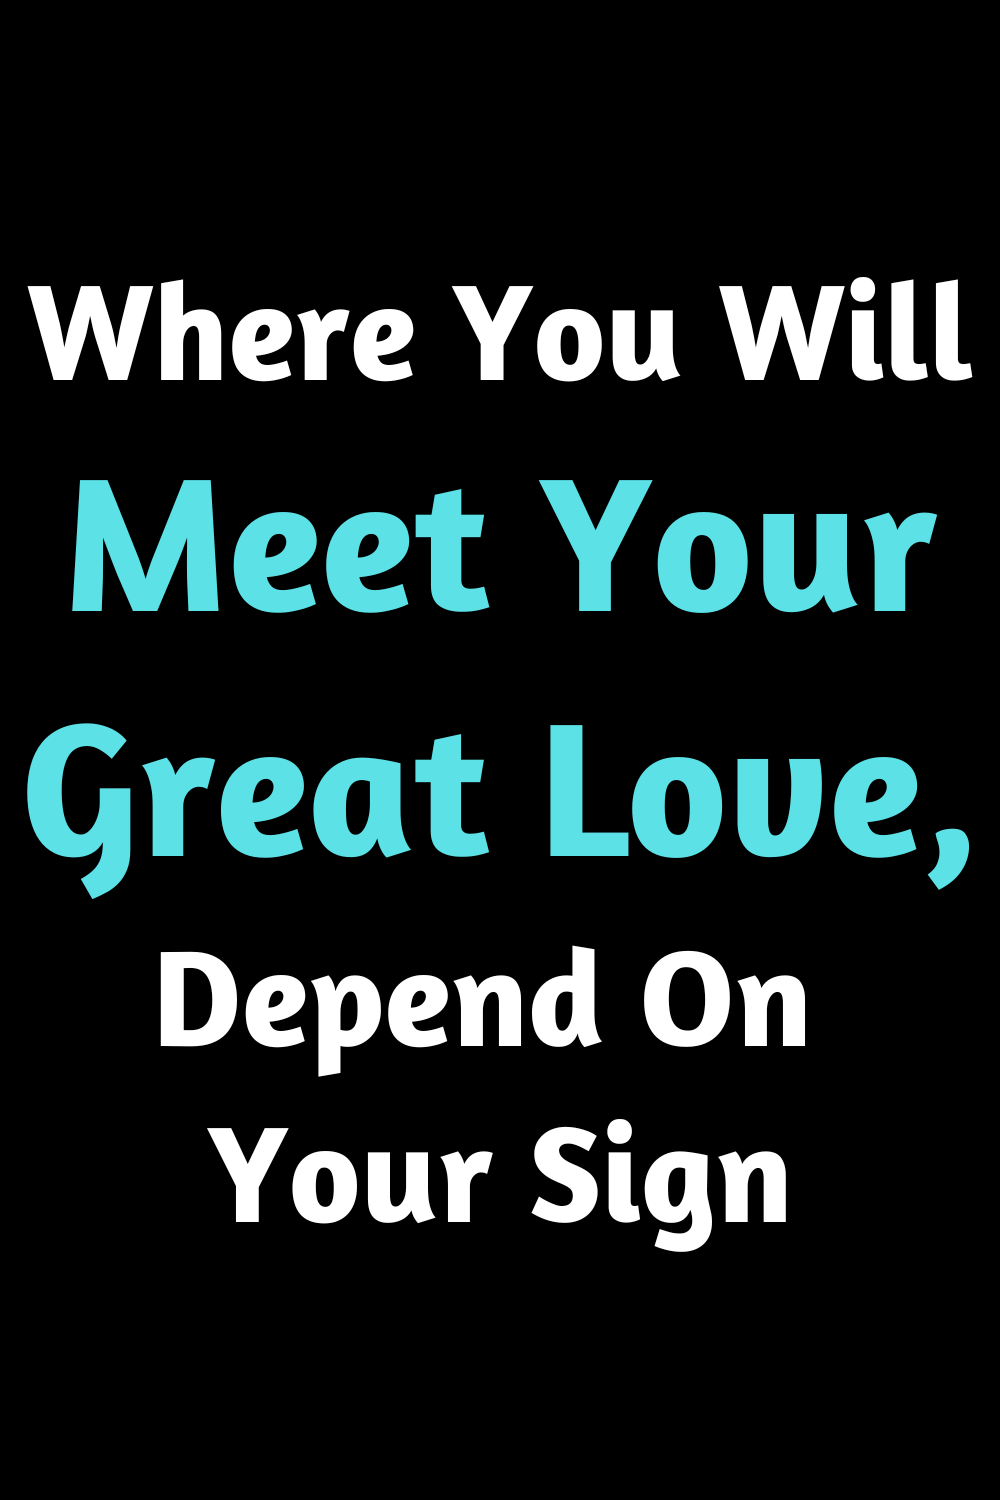 Where You Will Meet Your Great Love, Depend On Your Sign